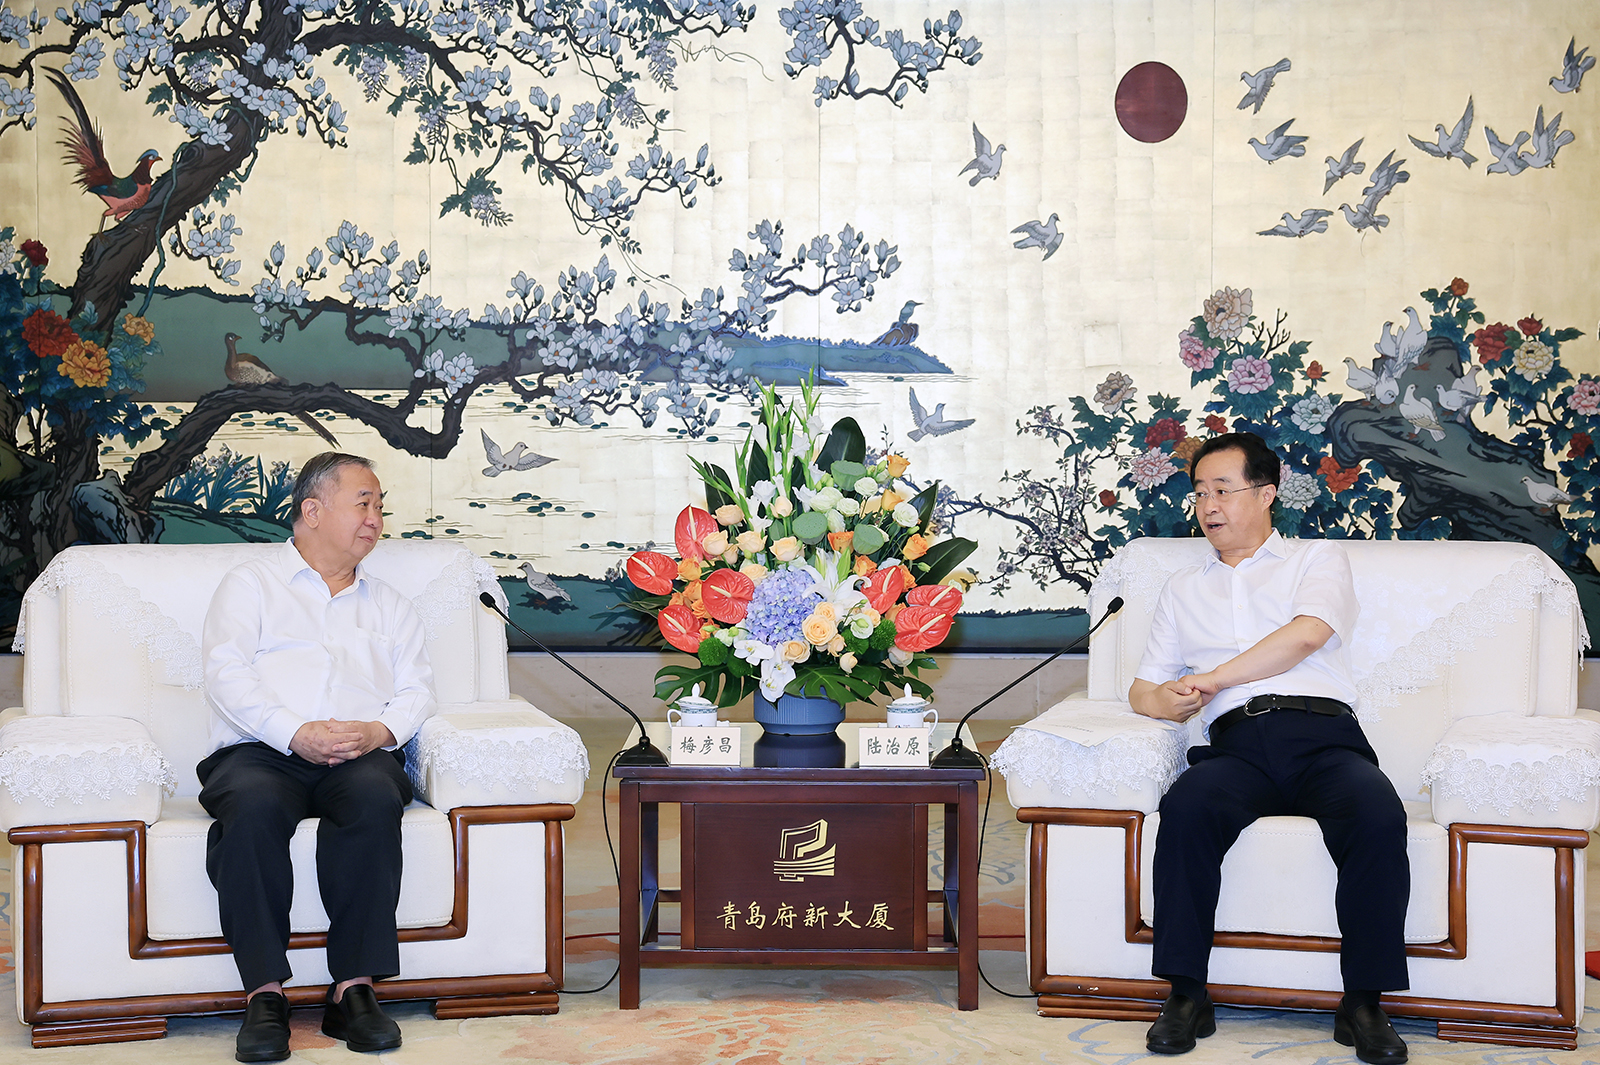 The President of CityU, Professor Freddy Boey Yin Chiang (left), led a delegation to meet with Mr Lu Zhiyuan (right), Deputy Secretary of the Shandong Provincial Committee and Secretary of the Qingdao Municipal Committee of the Chinese Communist Party.